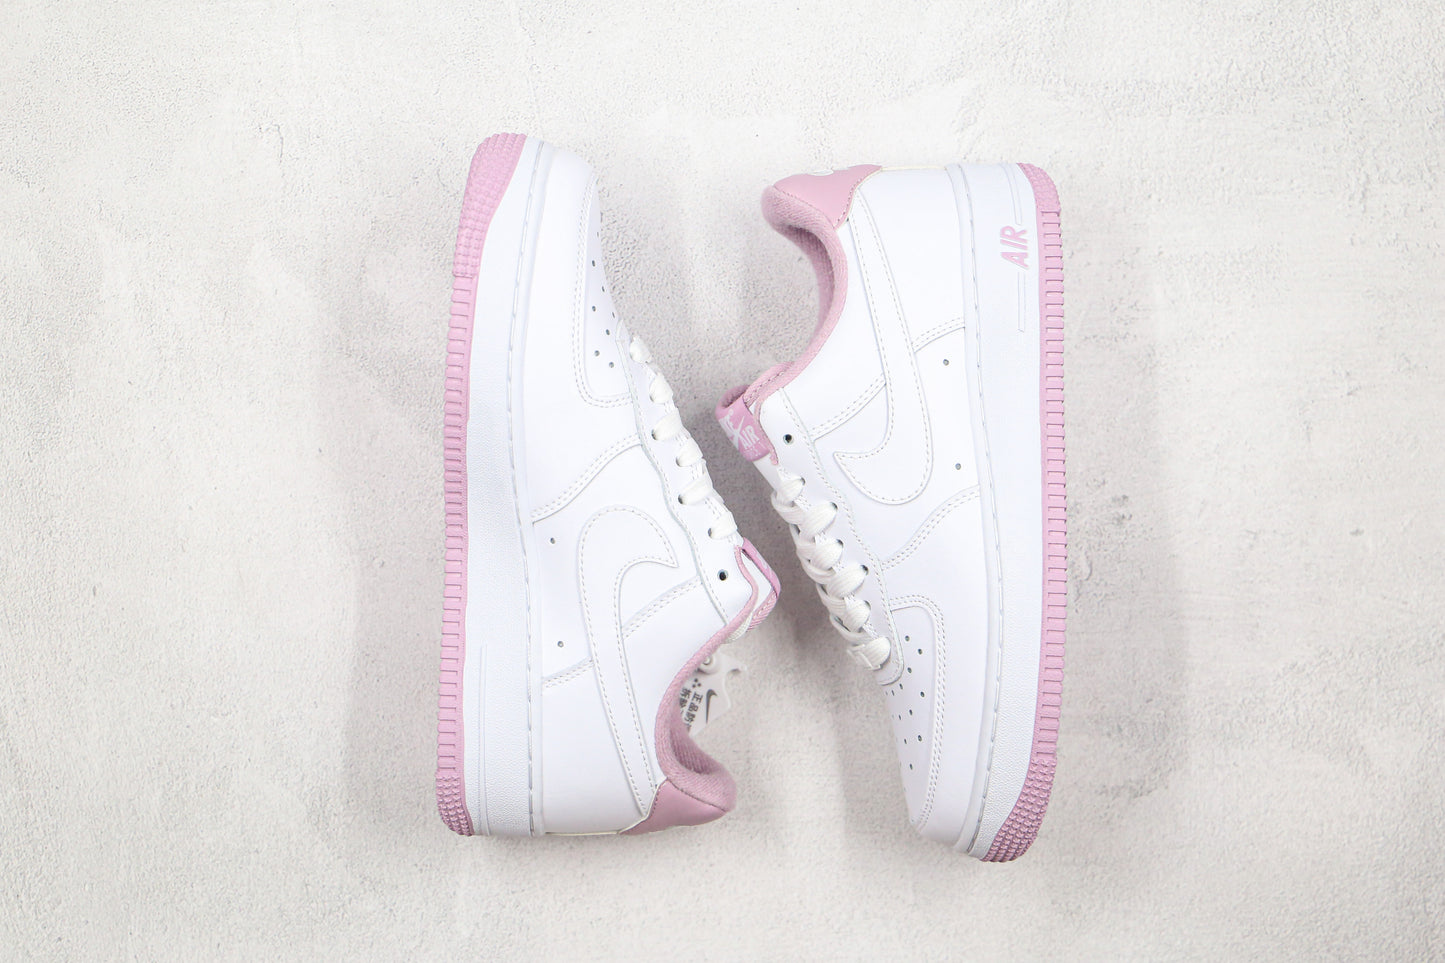 Air Force 1 '07 "White Iced Lilac"